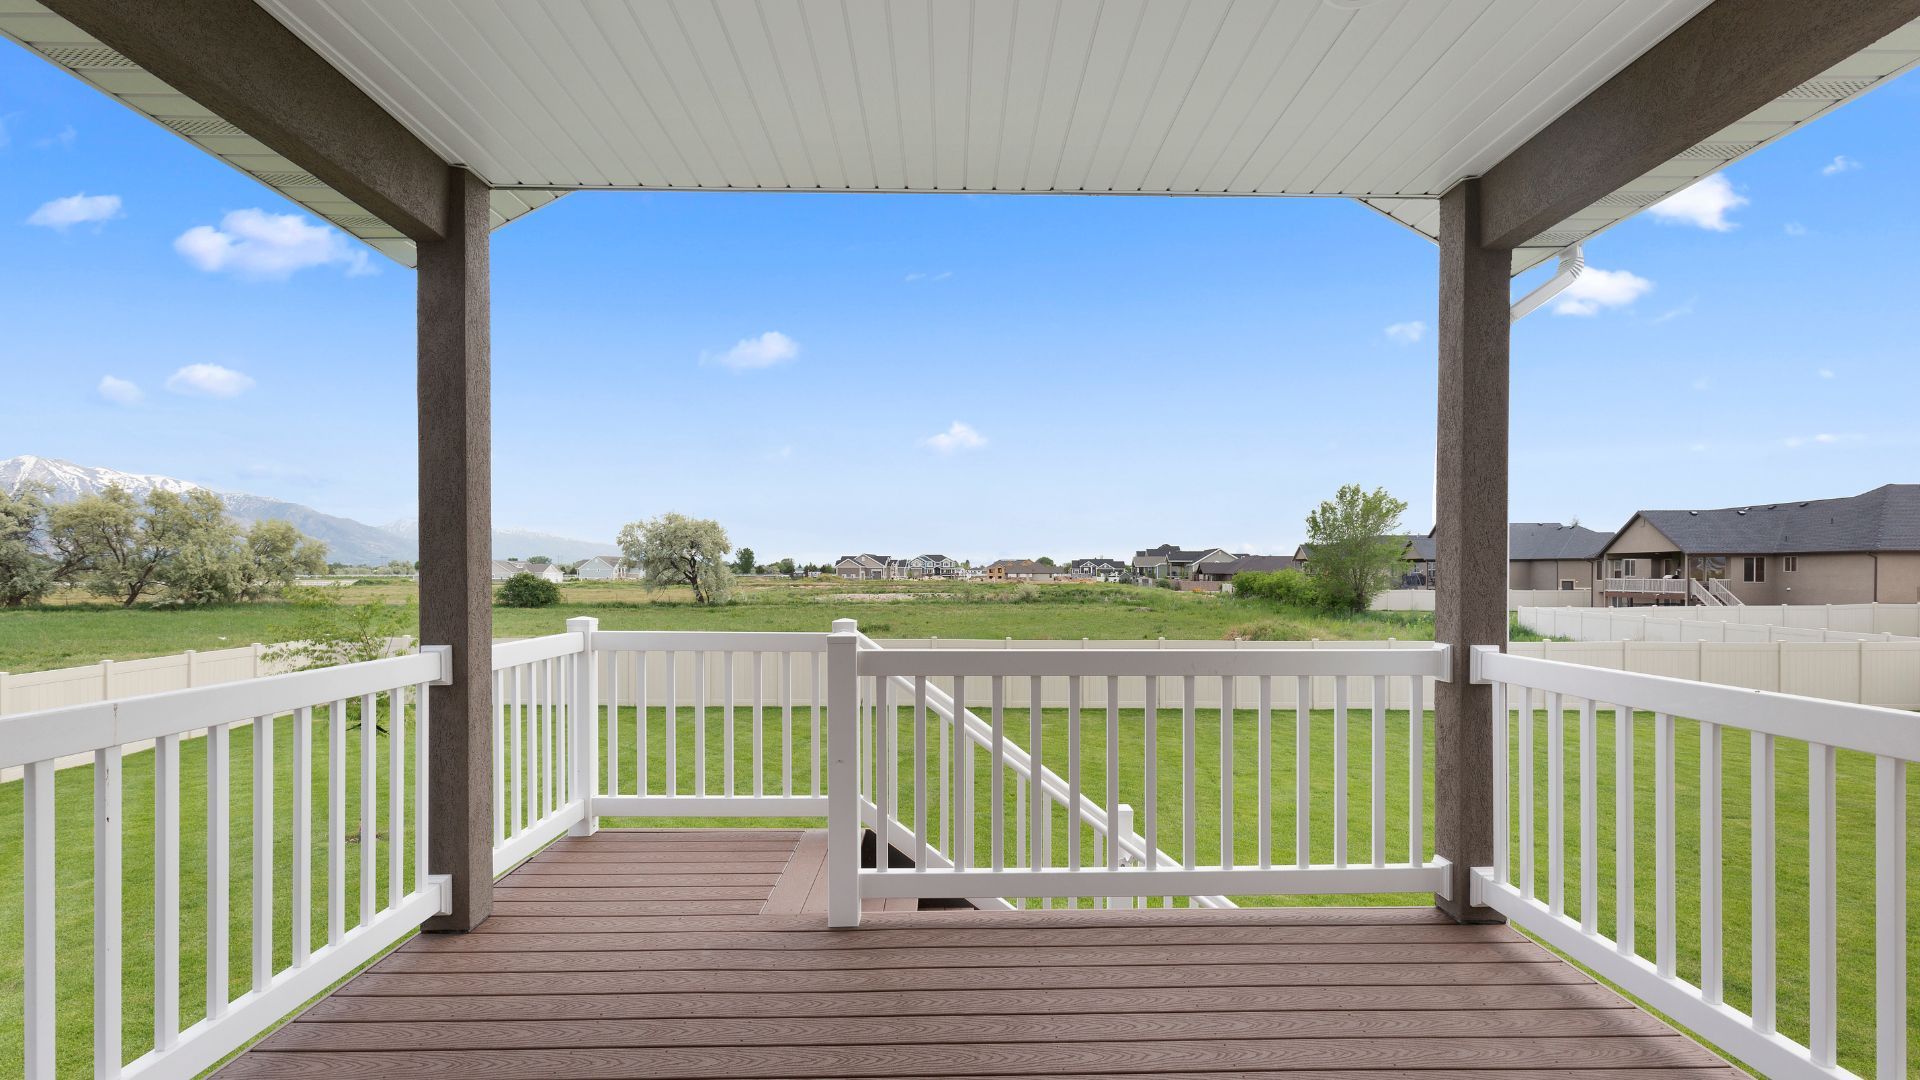 Covered deck in Lexington, KY with white railings and a scenic view of green fields and mountains.